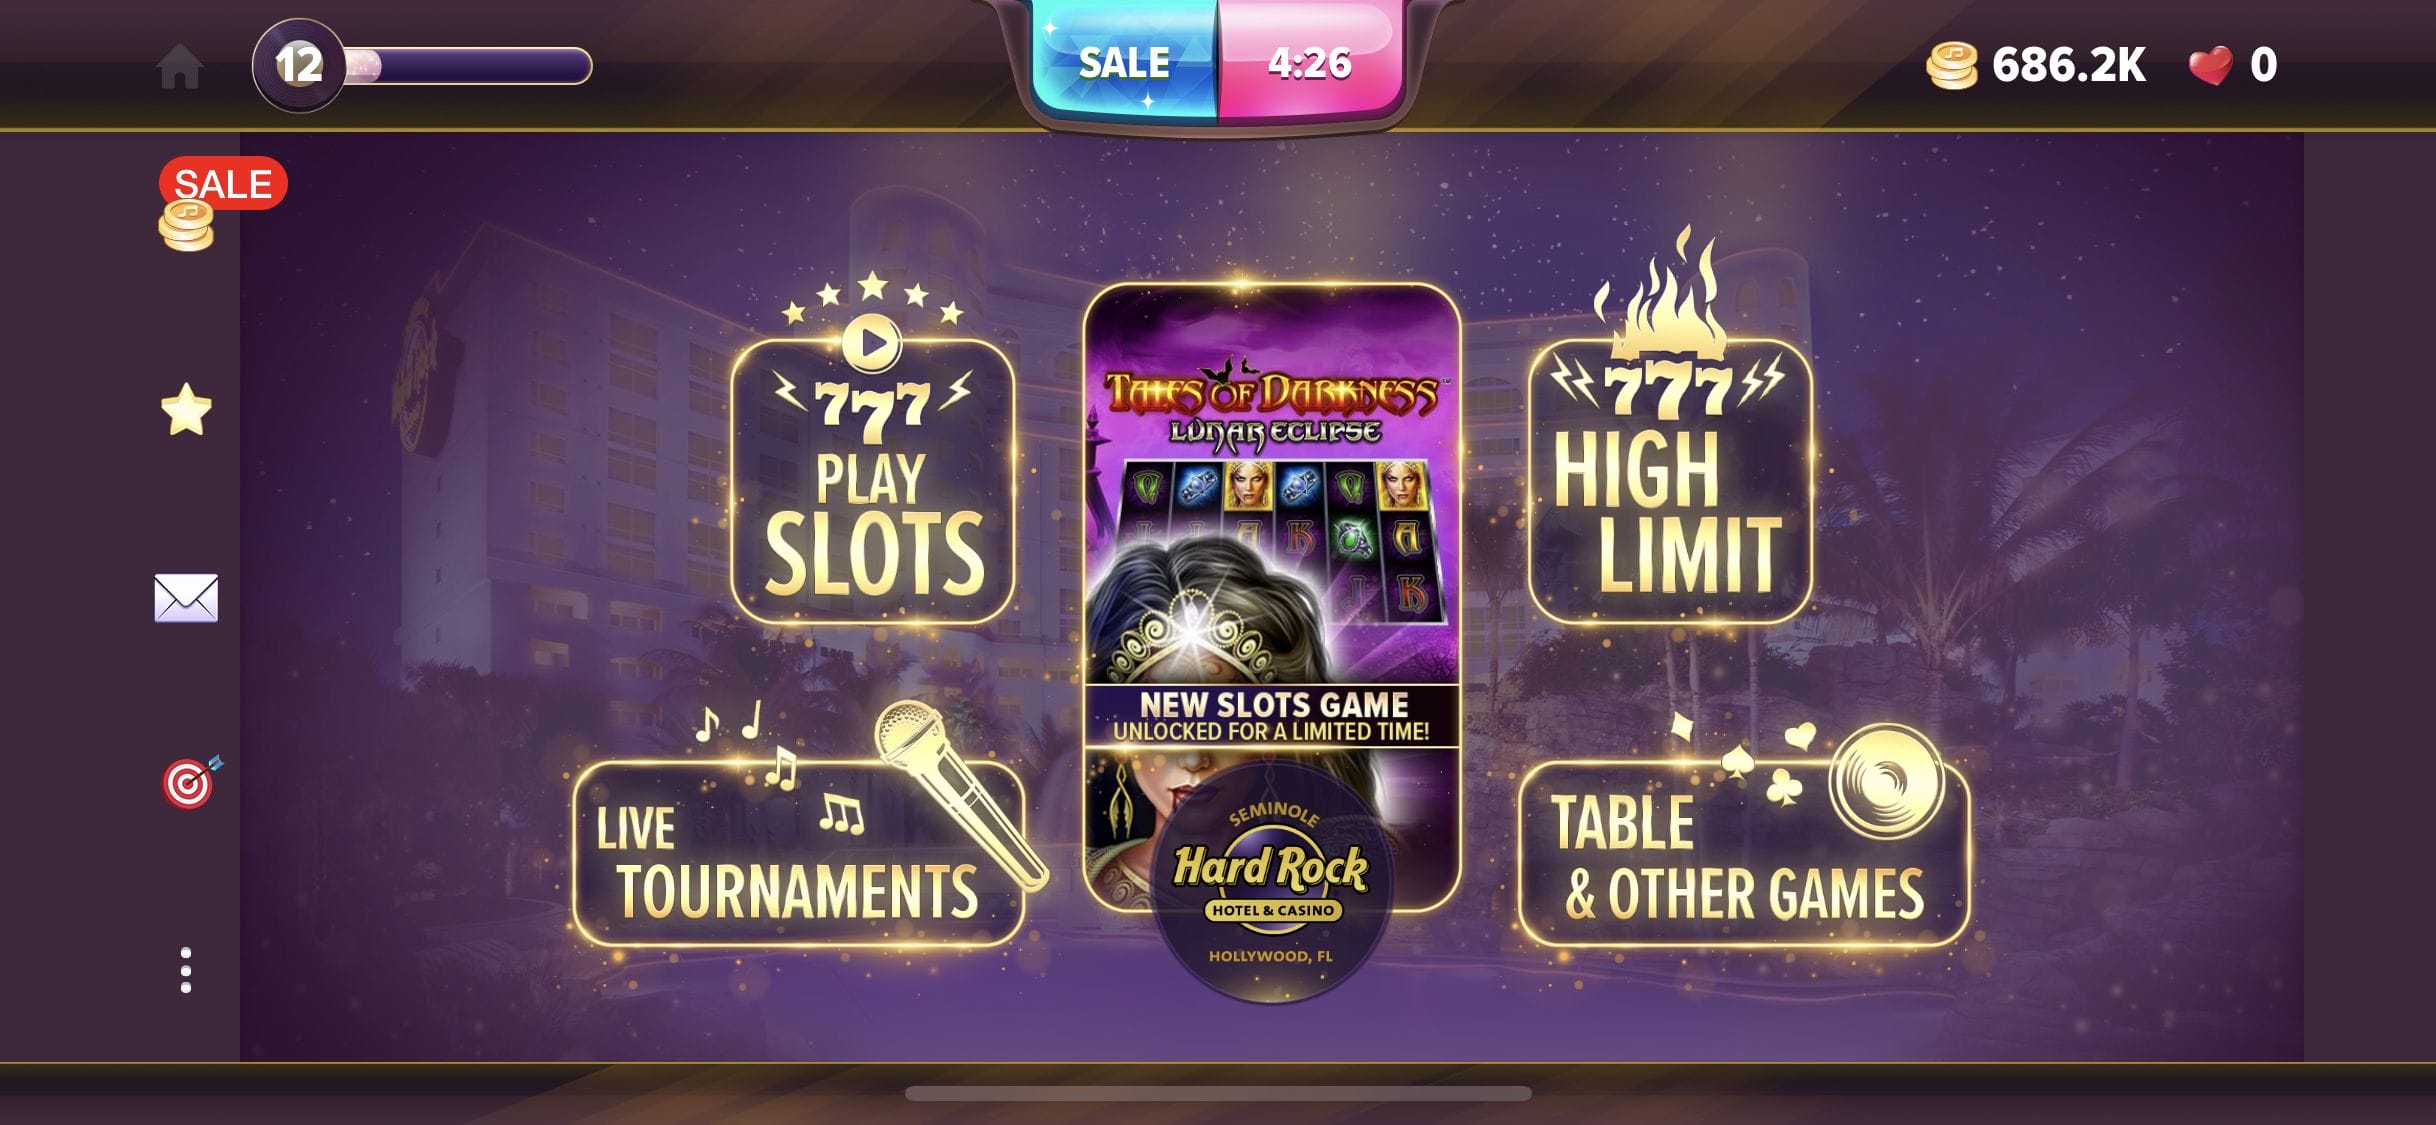 what is hard rock social casino